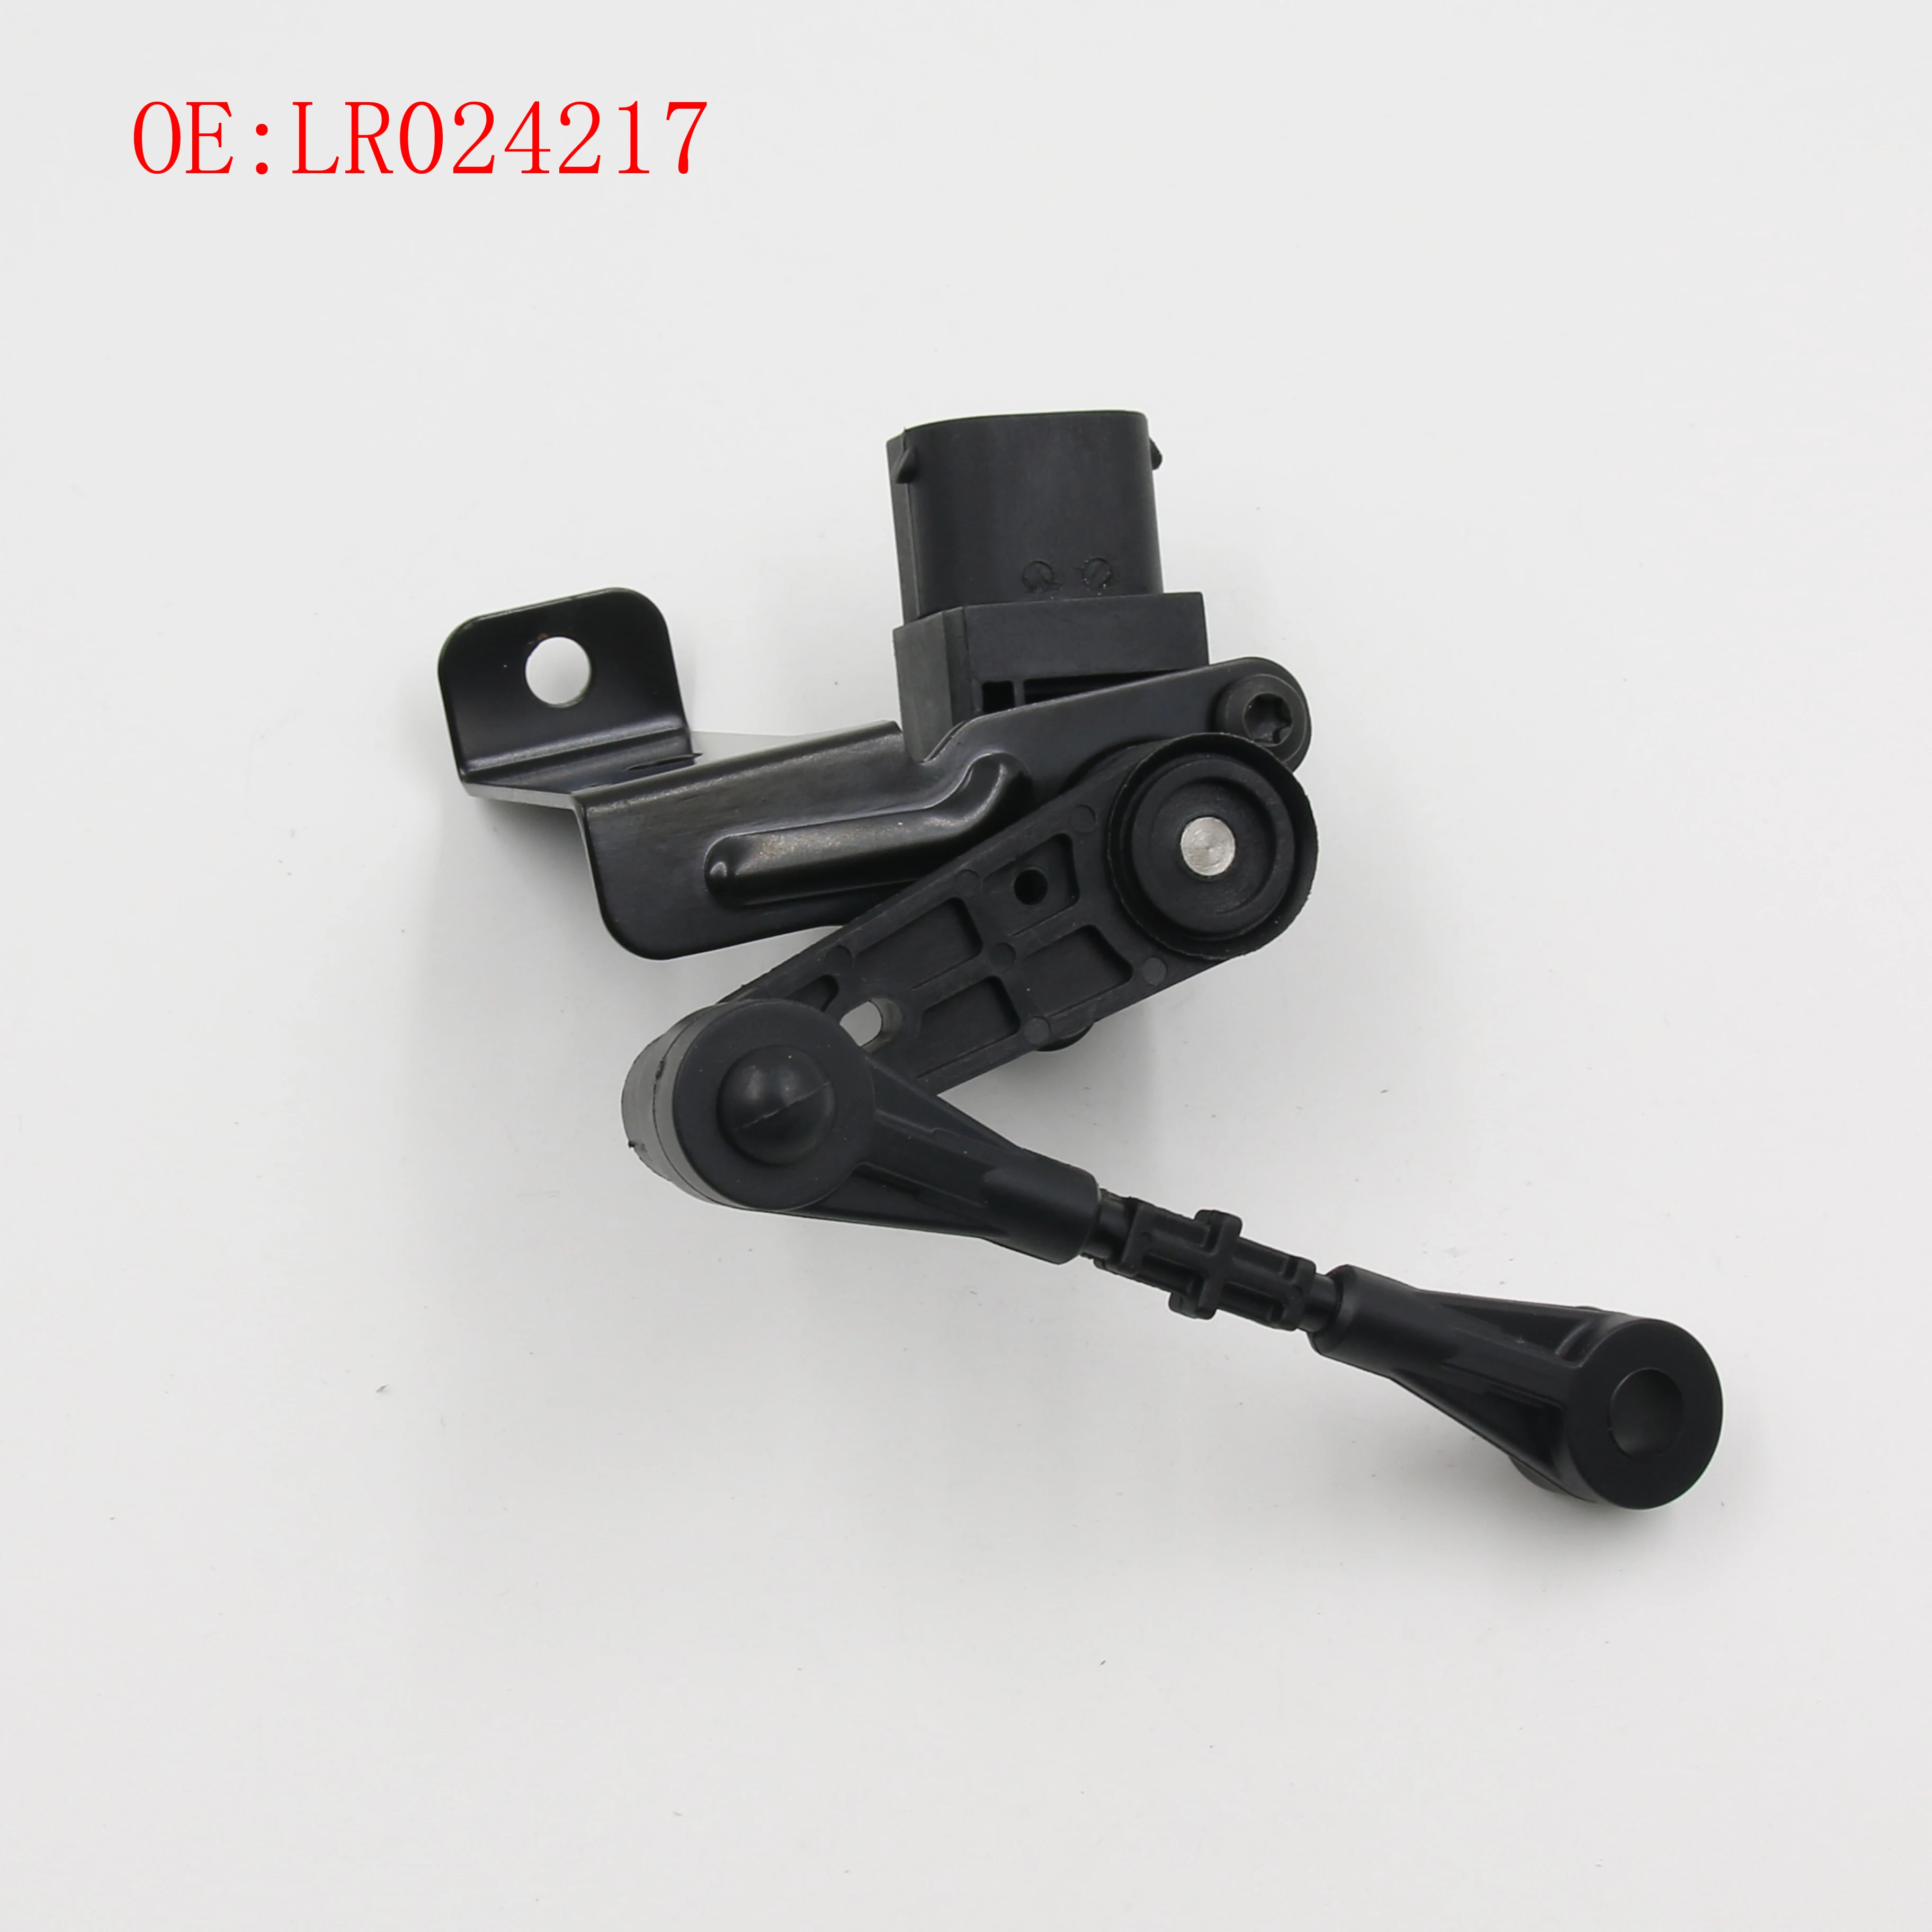 

New Air Suspension Height Level Sensor For Land Rover Range Rover Evoque L538 and Discovery Sport L550 2012-2017 OE LR024217